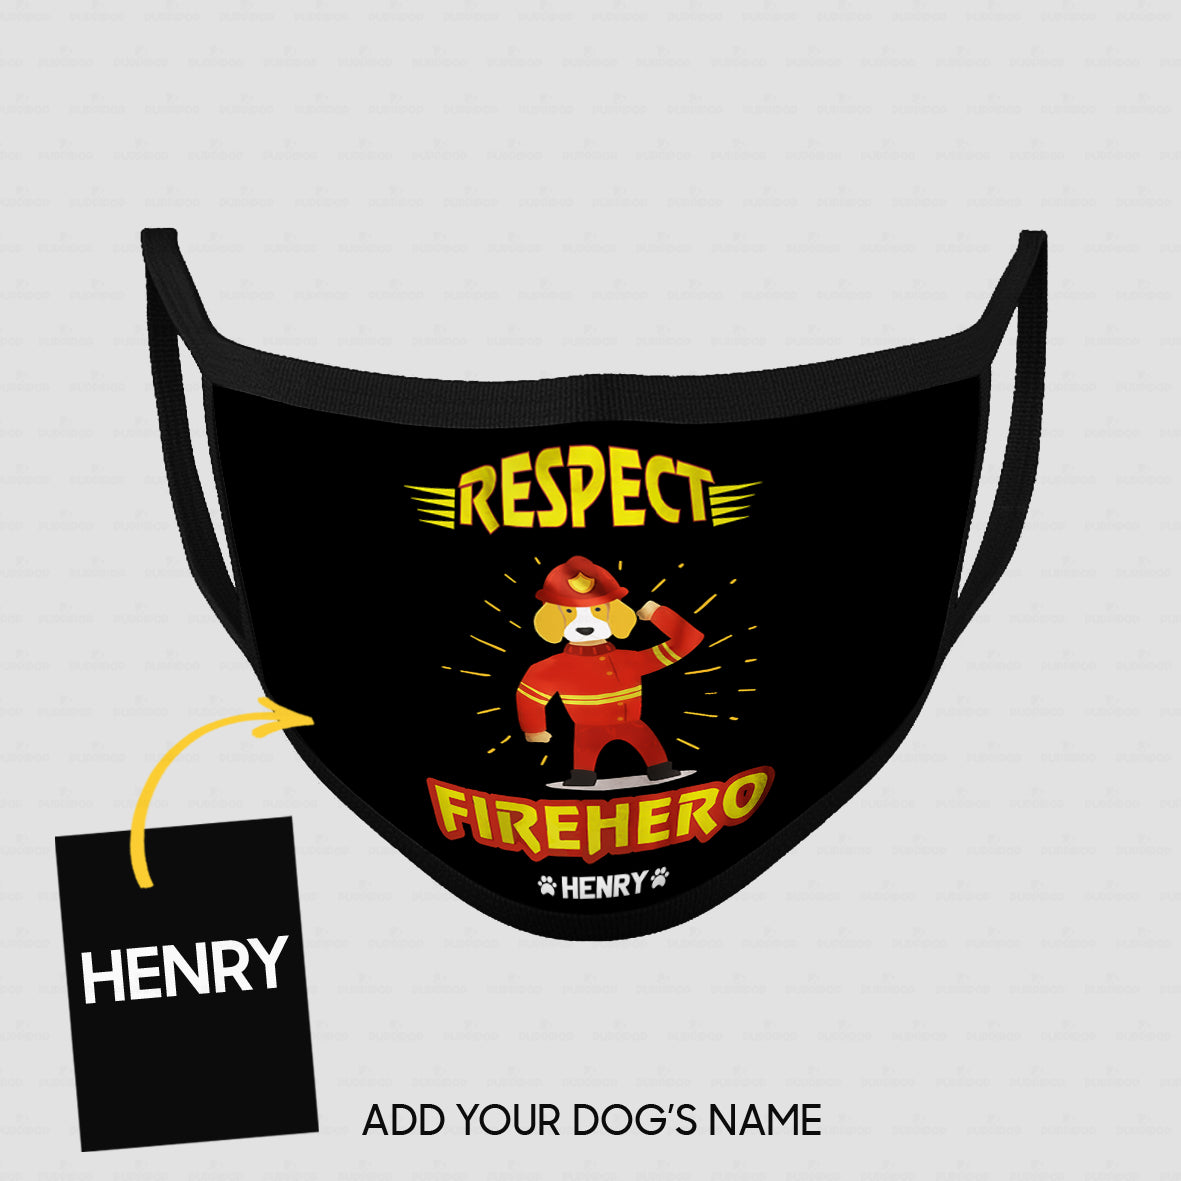 Personalized Dog Gift Idea - We Always Respect Firehero For Dog Lovers - Cloth Mask